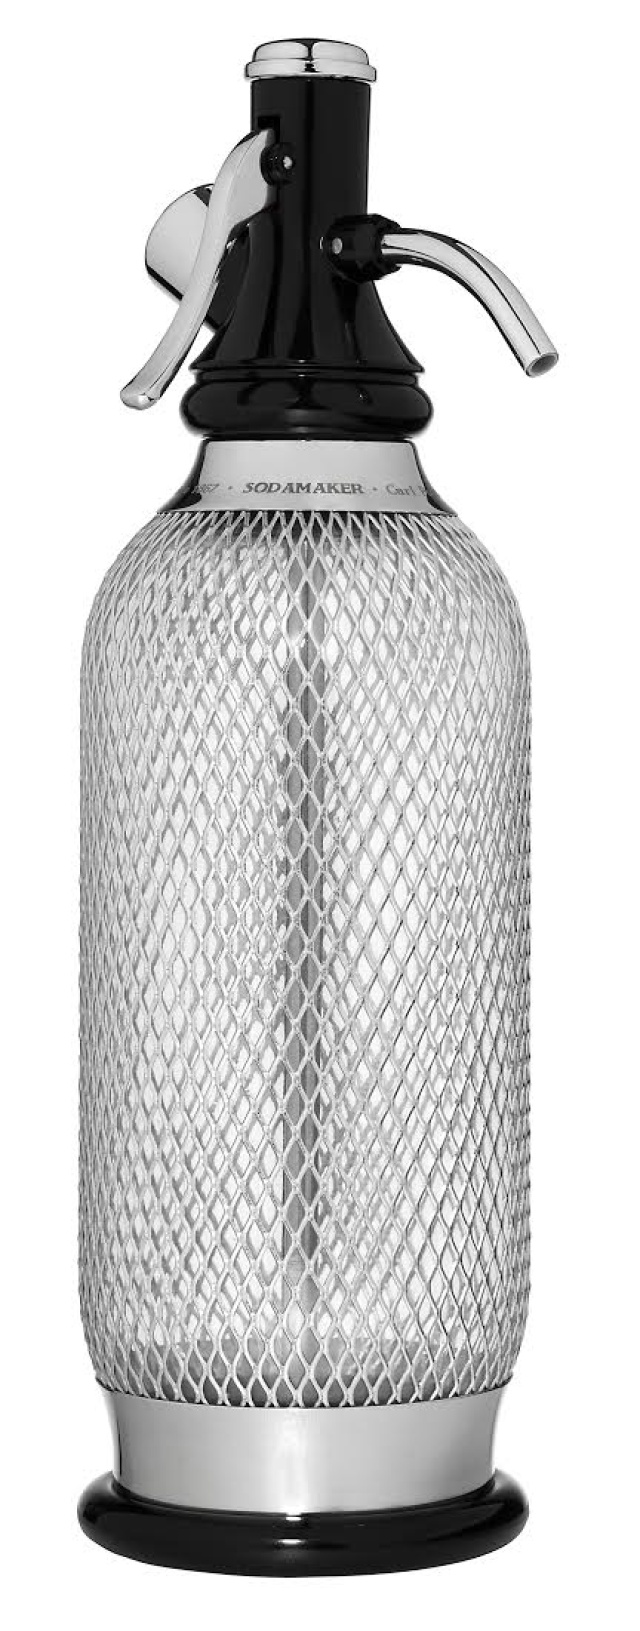 Soda siphon Classic, with mesh in retro style - iSi